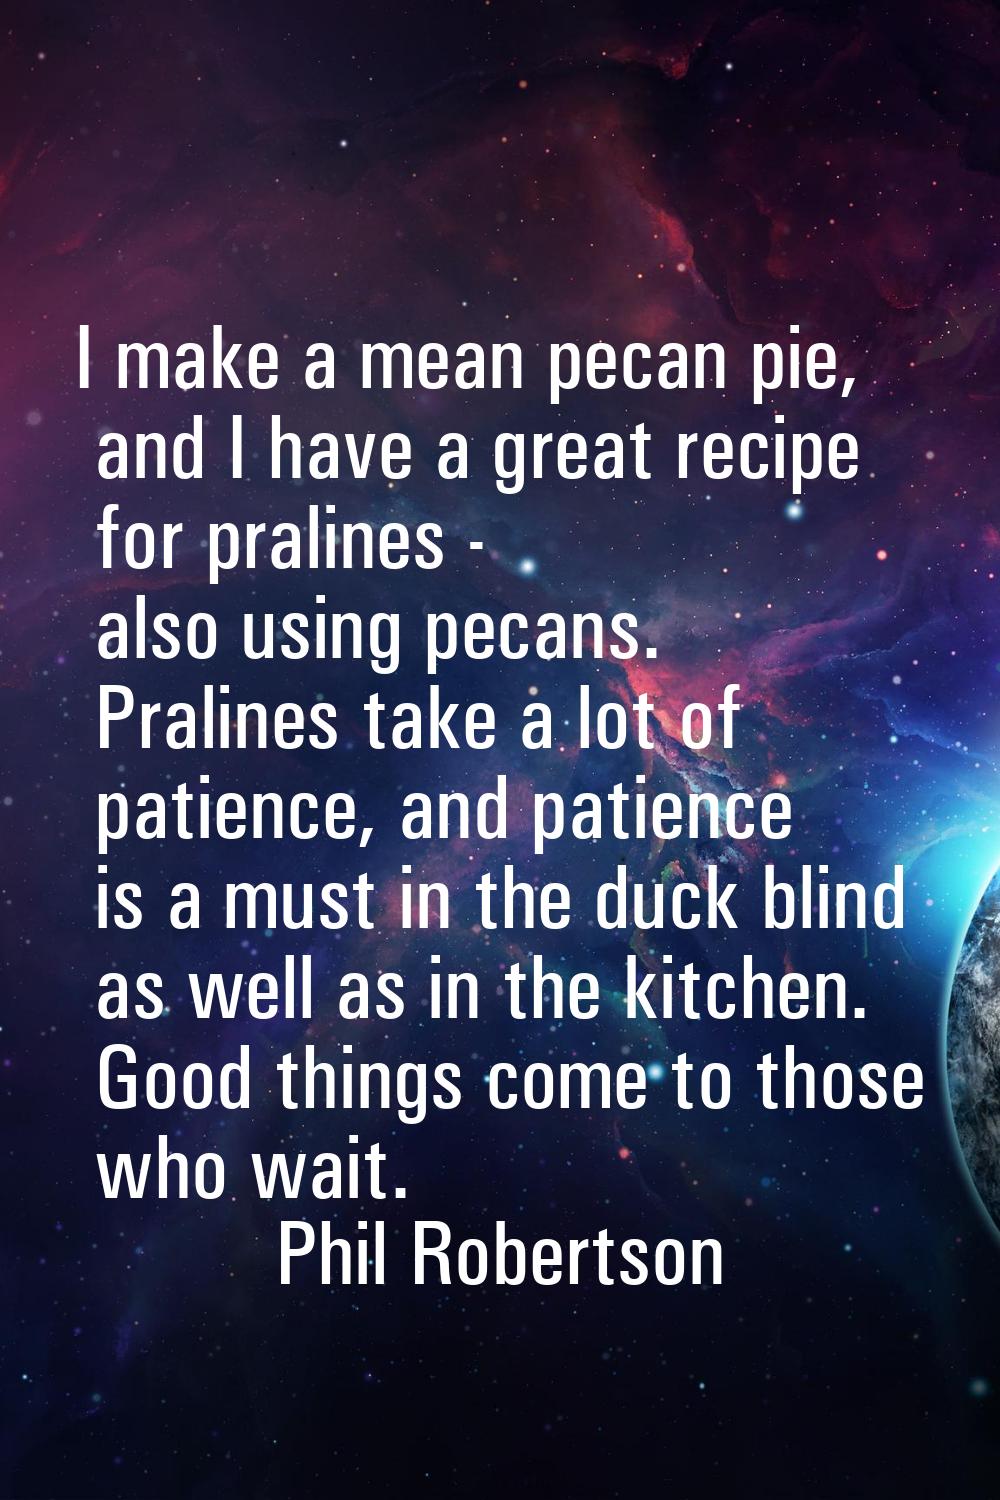 I make a mean pecan pie, and I have a great recipe for pralines - also using pecans. Pralines take 